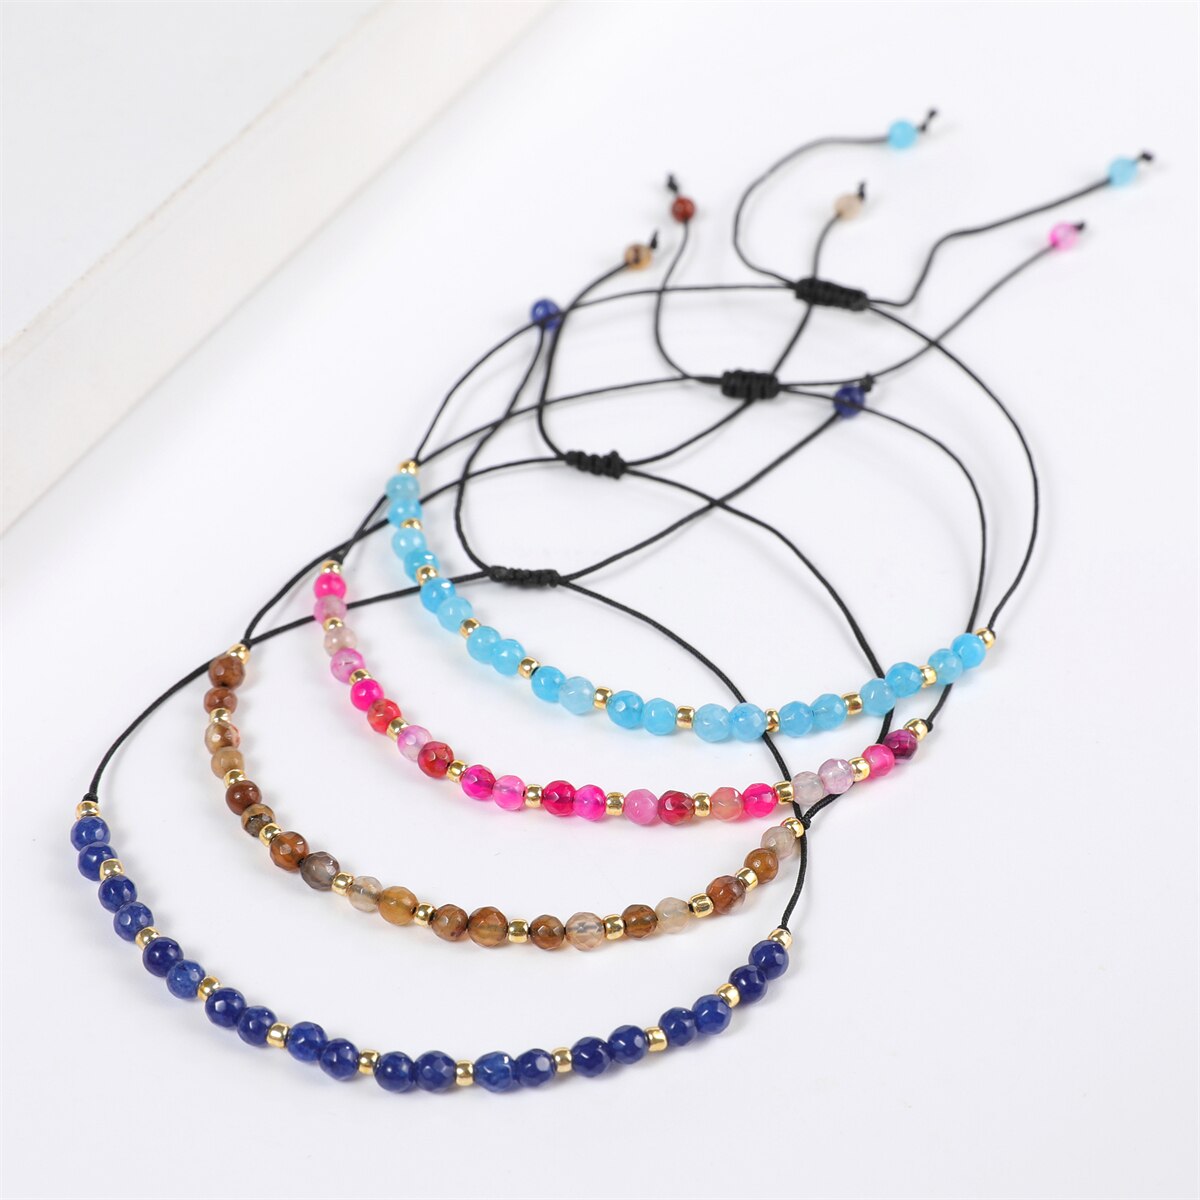 Faceted Crystal Beads Natural Stone Harms Bracelet Women Men Boho Adjustable Hand Braided Chain Healing Yoga Jewelry